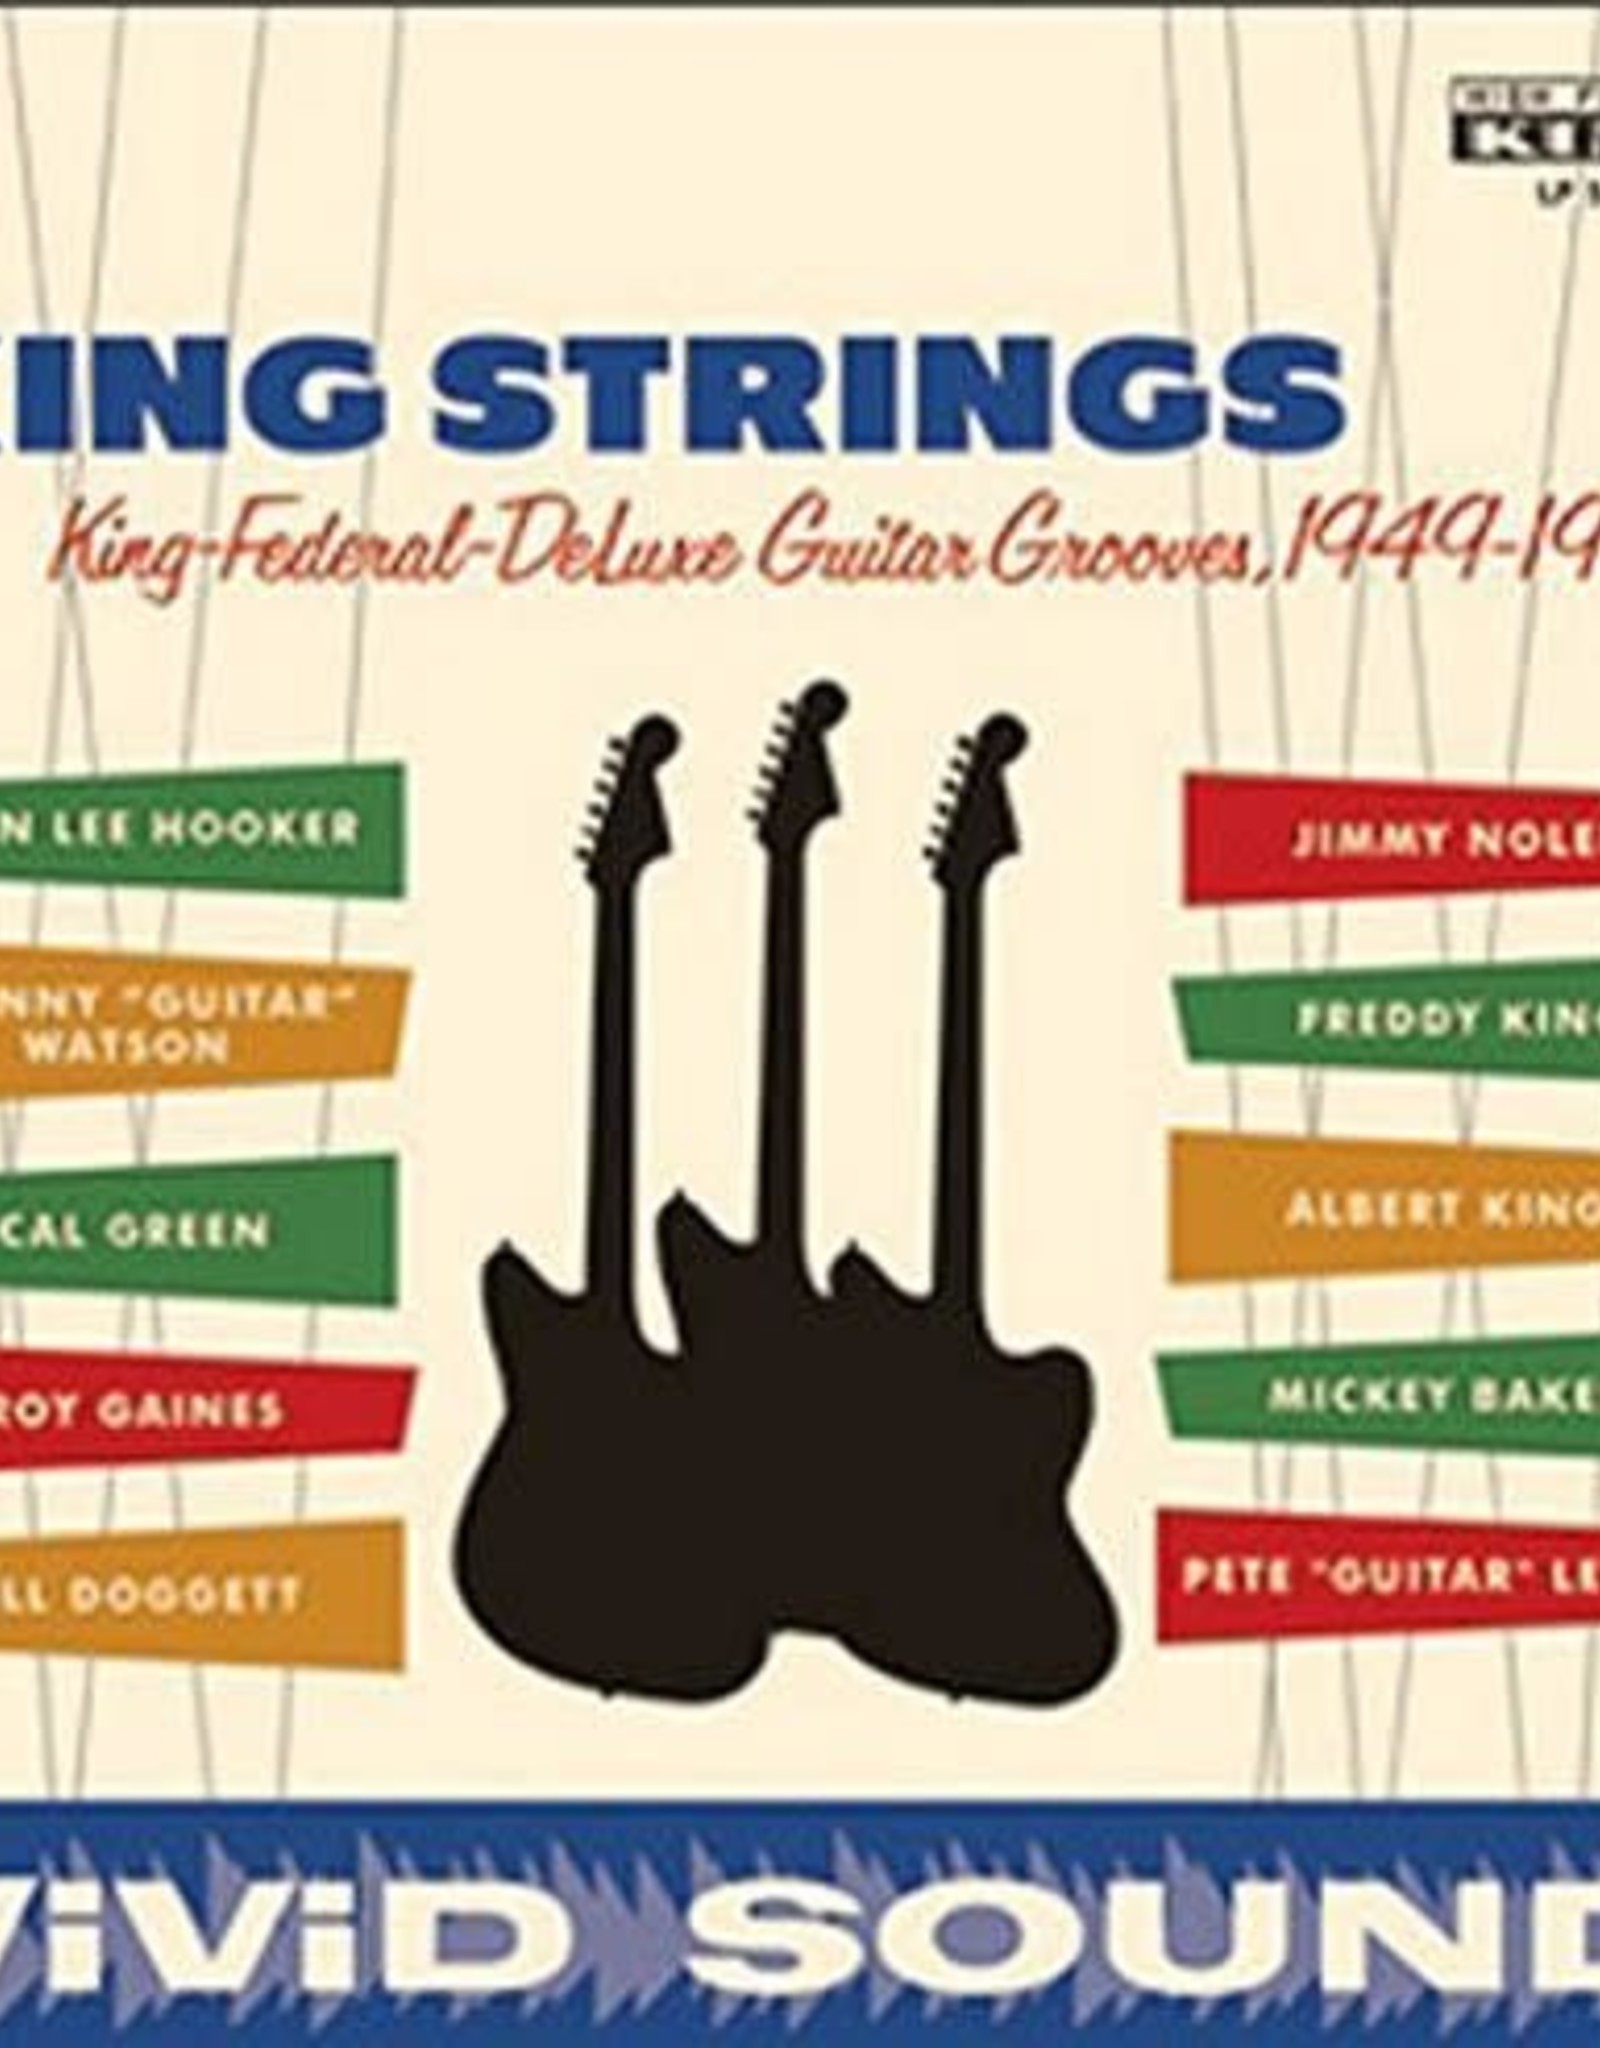 King Federal Deluxe Guitar Grooves 1949-1962